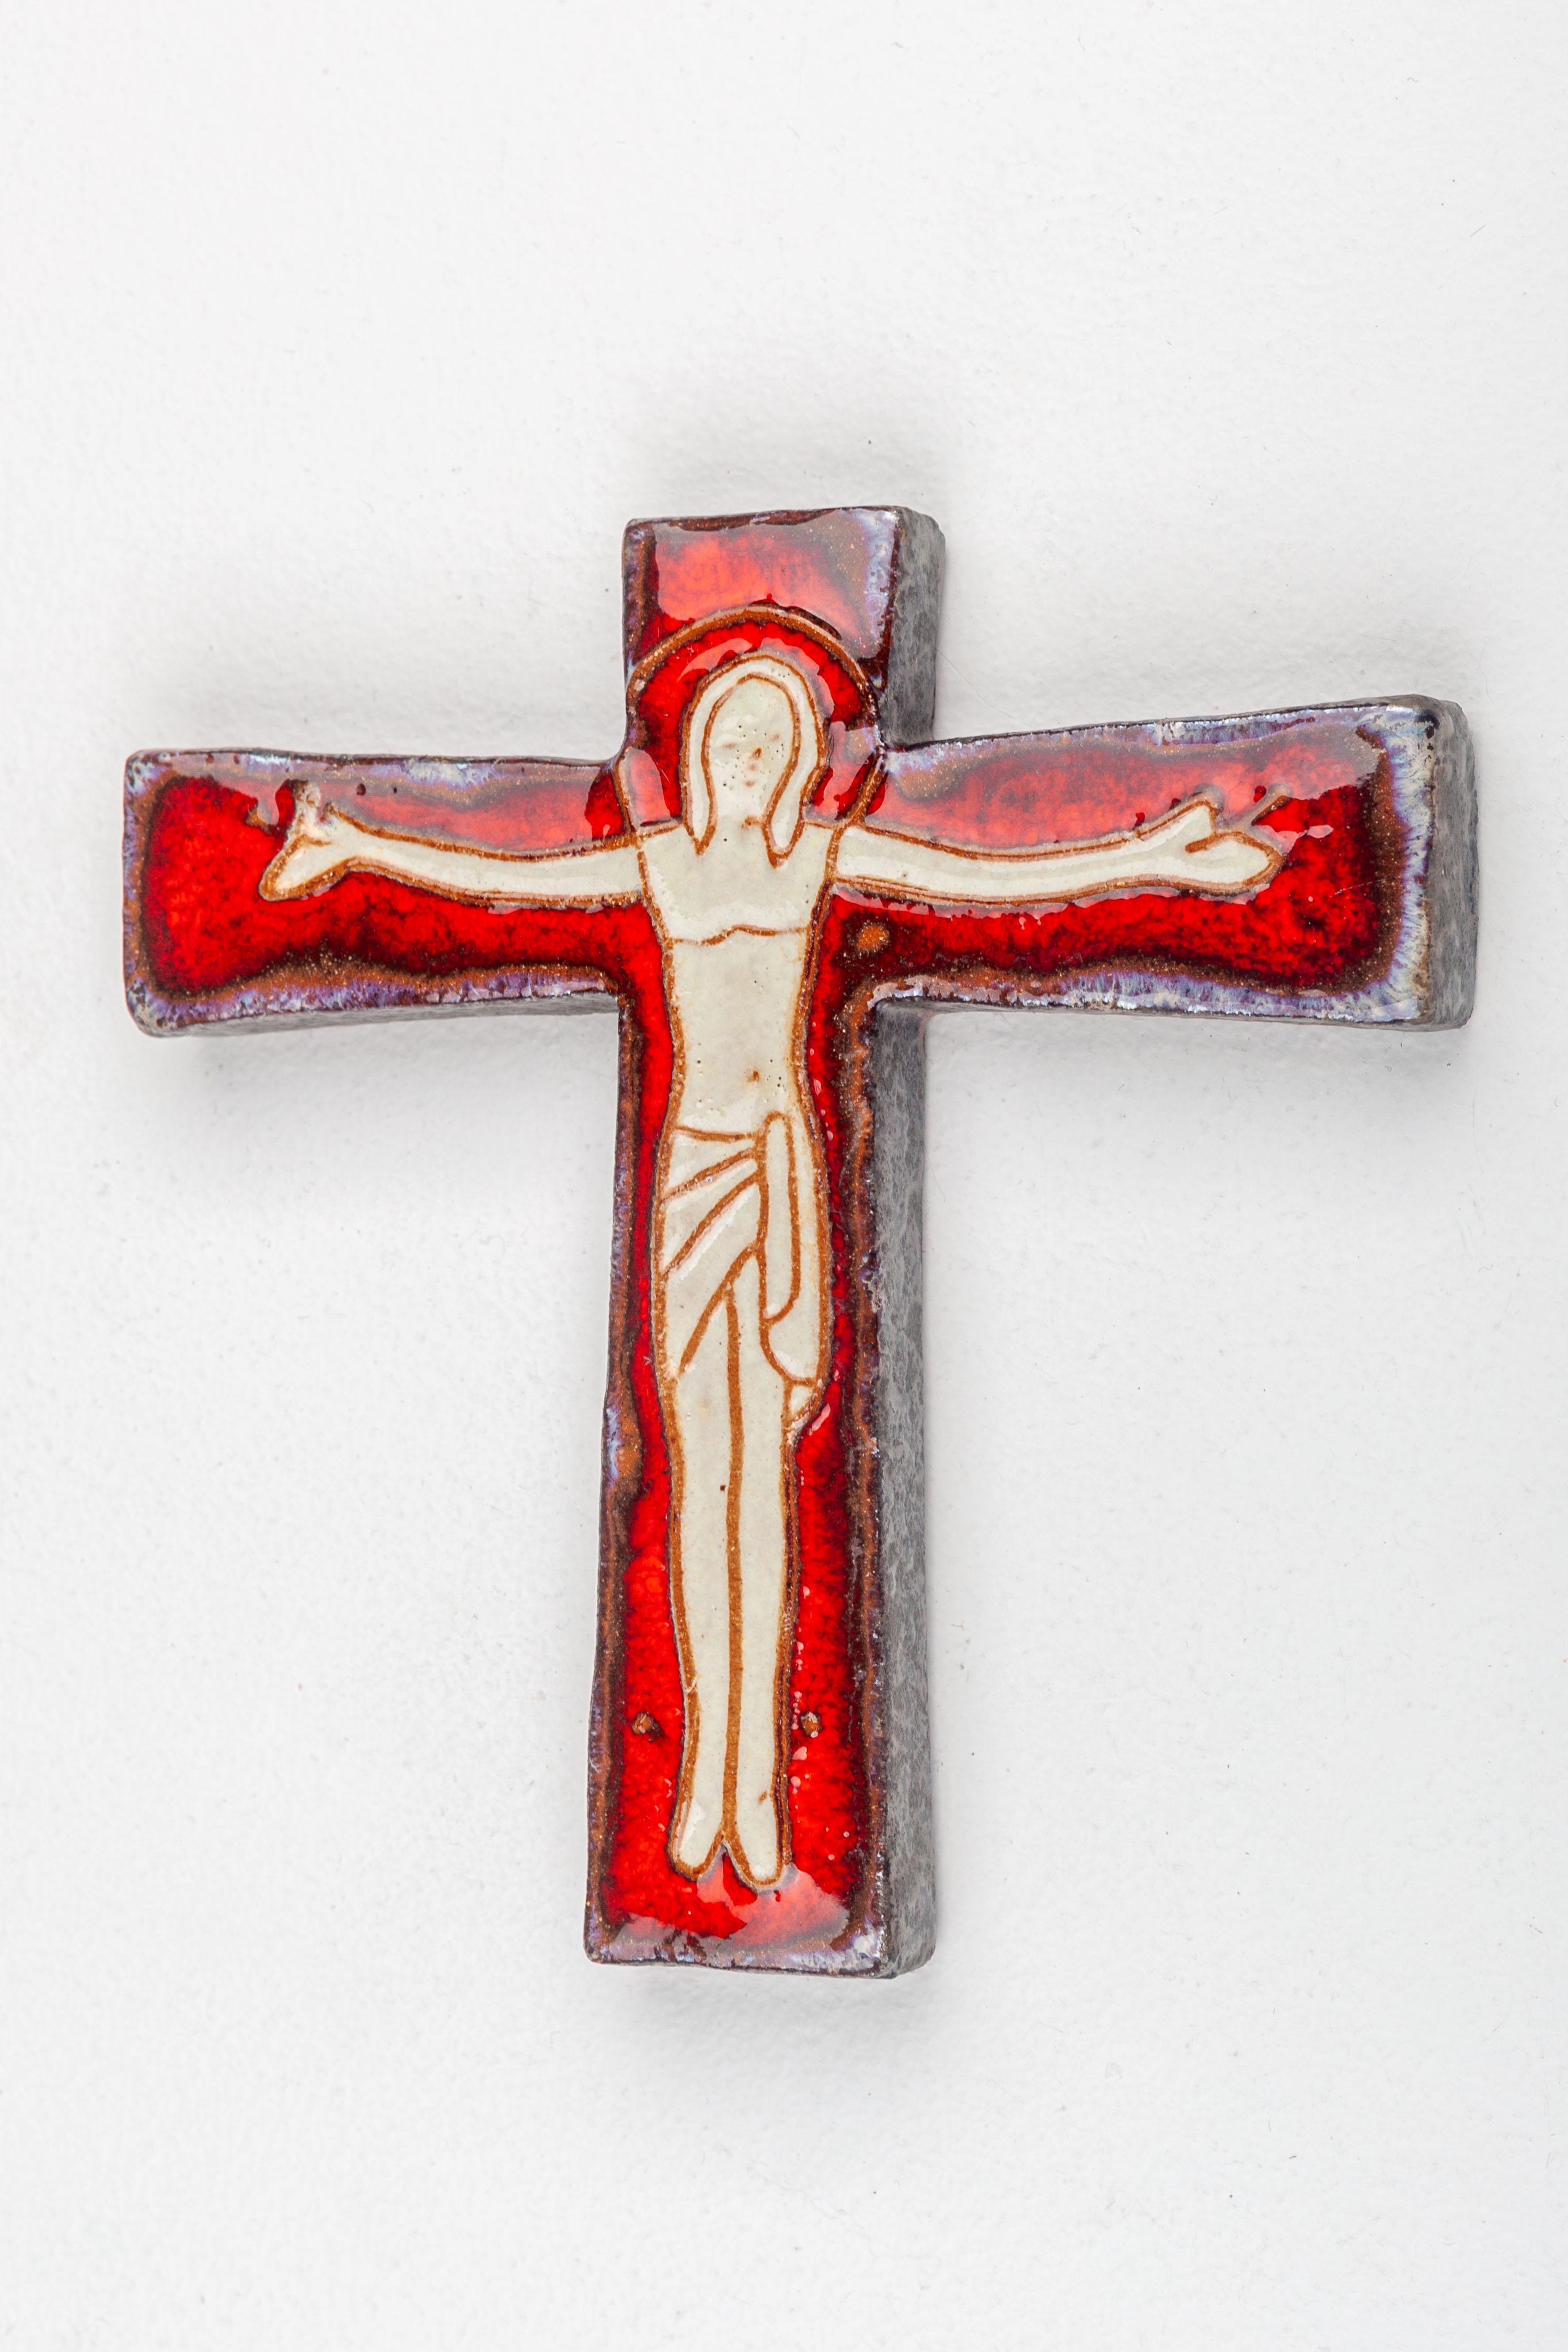 Mid Century Ceramic Wall Cross, Red & Beige, Hand Made Studio Pottery, Europe For Sale 3